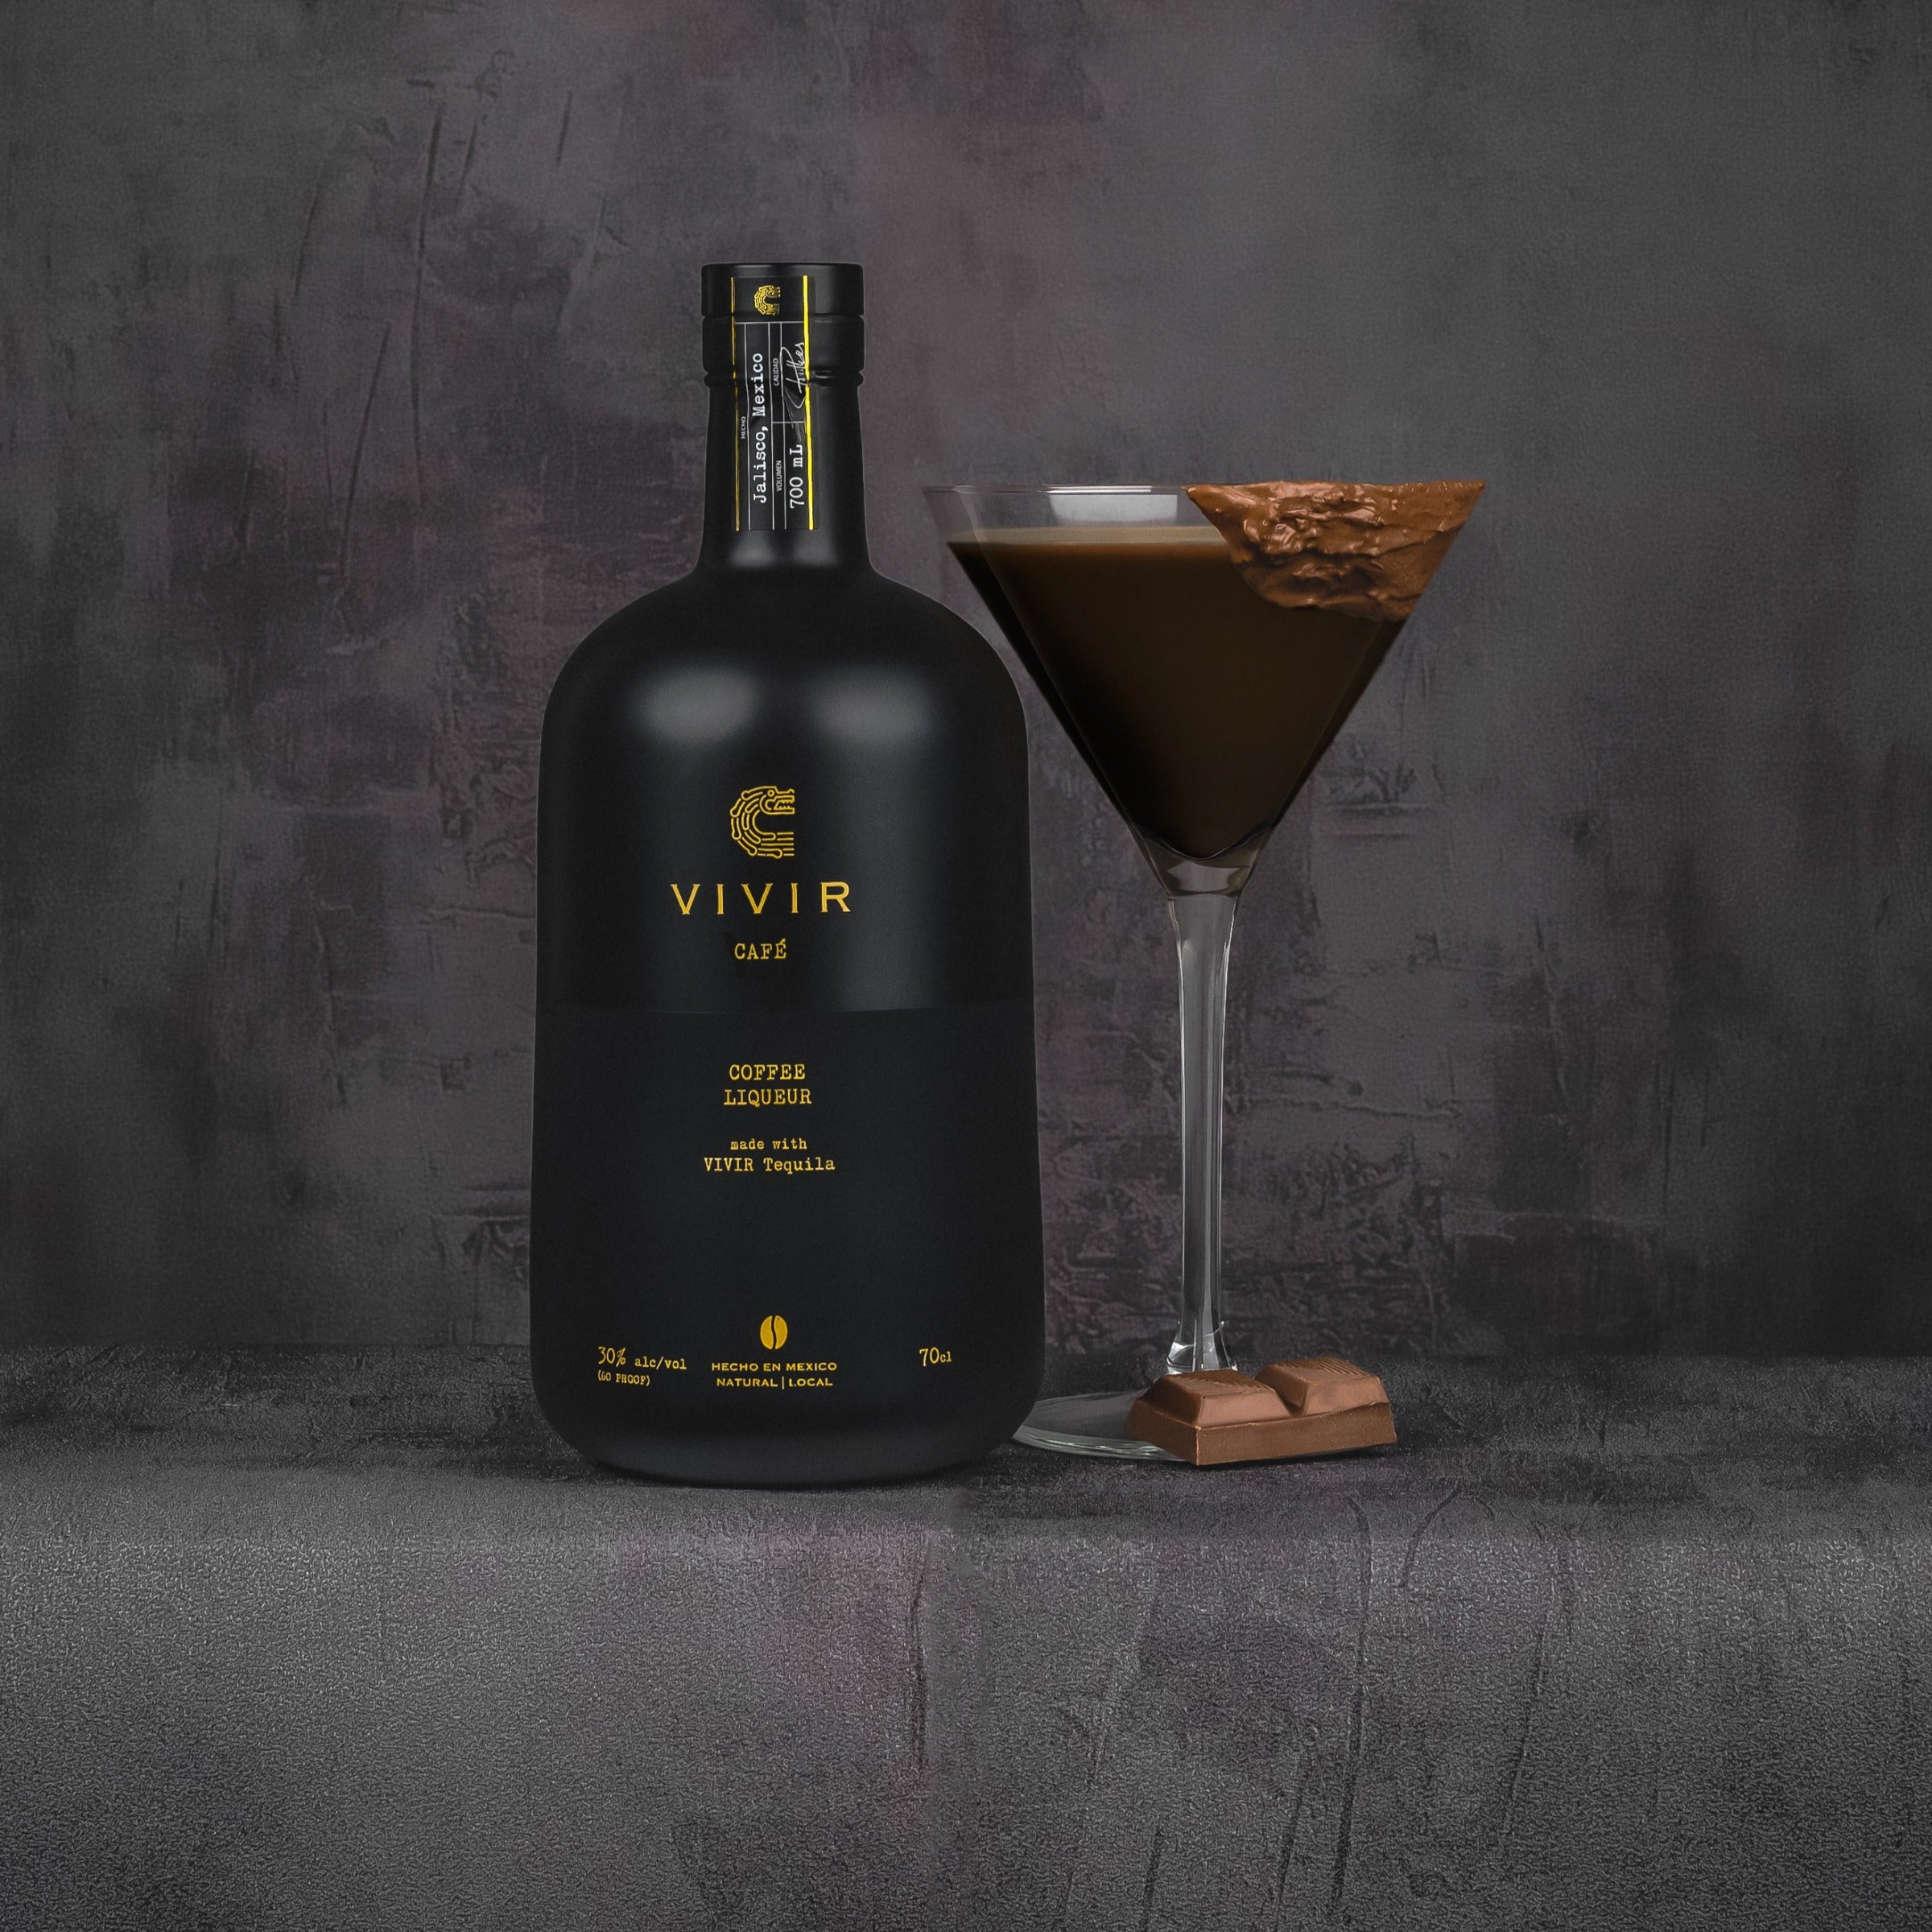 A bottle of VIVIR Café VS positioned next to a chocolate-coloured cocktail in a martini glass.